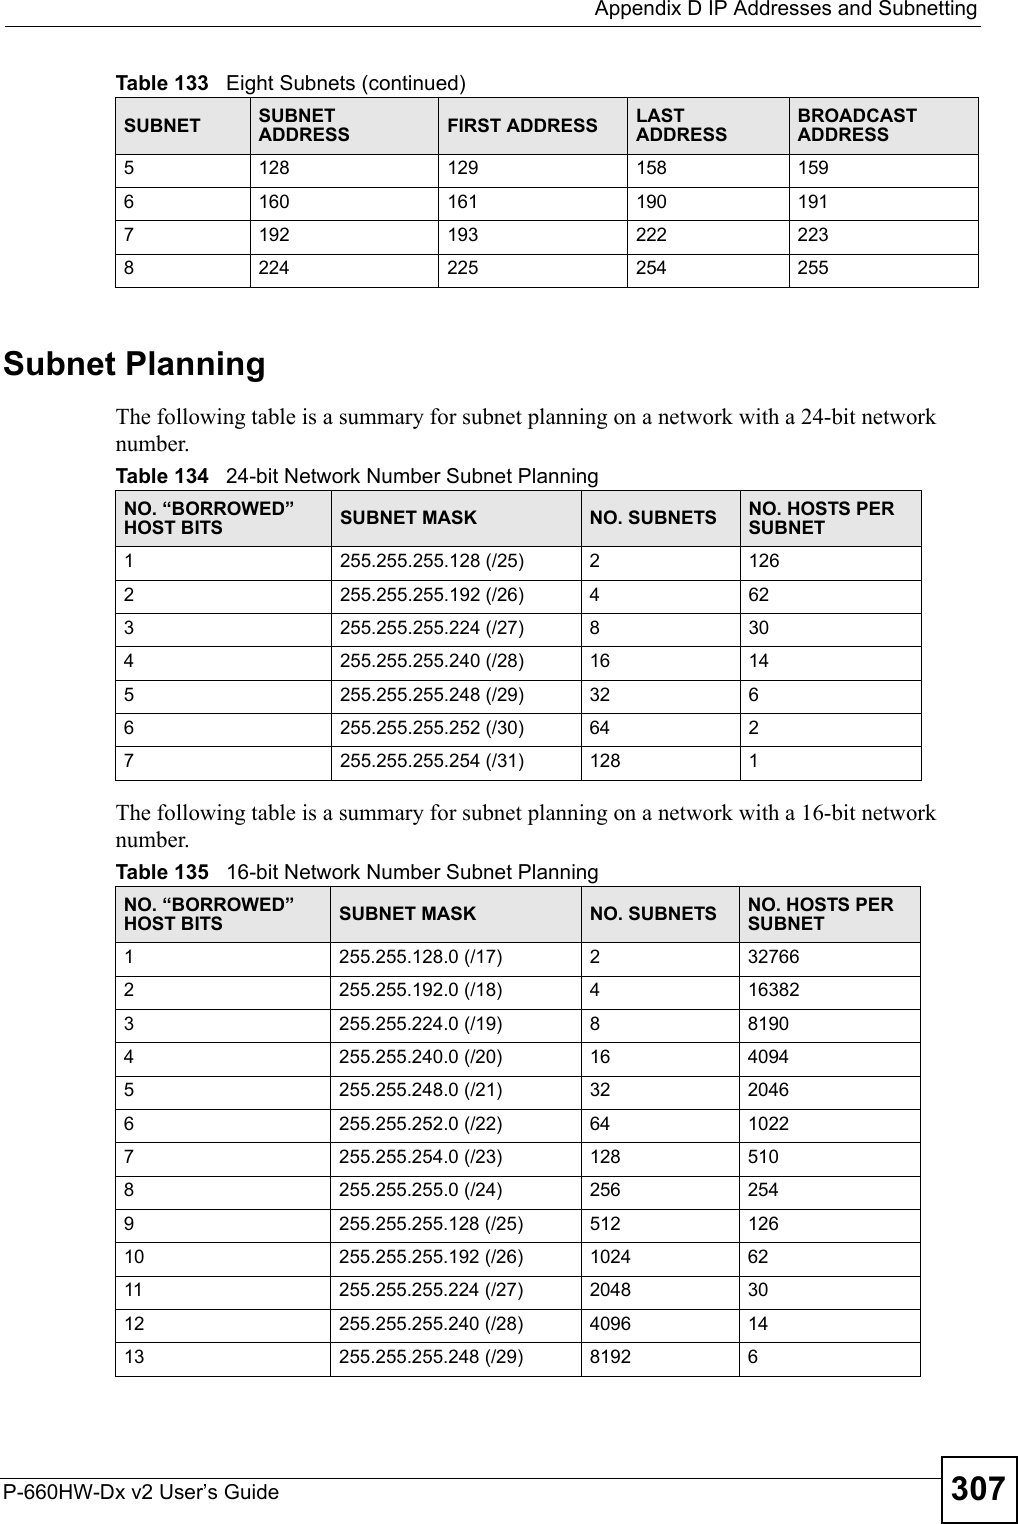  Appendix D IP Addresses and SubnettingP-660HW-Dx v2 User’s Guide 307Subnet PlanningThe following table is a summary for subnet planning on a network with a 24-bit network number.The following table is a summary for subnet planning on a network with a 16-bit network number. 5128 129 158 1596160 161 190 1917192 193 222 2238224 225 254 255Table 133   Eight Subnets (continued)SUBNET SUBNET ADDRESS FIRST ADDRESS LAST ADDRESSBROADCAST ADDRESSTable 134   24-bit Network Number Subnet PlanningNO. “BORROWED” HOST BITS SUBNET MASK NO. SUBNETS NO. HOSTS PER SUBNET1255.255.255.128 (/25) 21262255.255.255.192 (/26) 4623255.255.255.224 (/27) 8304255.255.255.240 (/28) 16 145255.255.255.248 (/29) 32 66255.255.255.252 (/30) 64 27255.255.255.254 (/31) 128 1Table 135   16-bit Network Number Subnet PlanningNO. “BORROWED” HOST BITS SUBNET MASK NO. SUBNETS NO. HOSTS PER SUBNET1255.255.128.0 (/17) 2327662255.255.192.0 (/18) 4163823255.255.224.0 (/19) 881904255.255.240.0 (/20) 16 40945255.255.248.0 (/21) 32 20466255.255.252.0 (/22) 64 10227255.255.254.0 (/23) 128 5108255.255.255.0 (/24) 256 2549255.255.255.128 (/25) 512 12610 255.255.255.192 (/26) 1024 6211 255.255.255.224 (/27) 2048 3012 255.255.255.240 (/28) 4096 1413 255.255.255.248 (/29) 8192 6